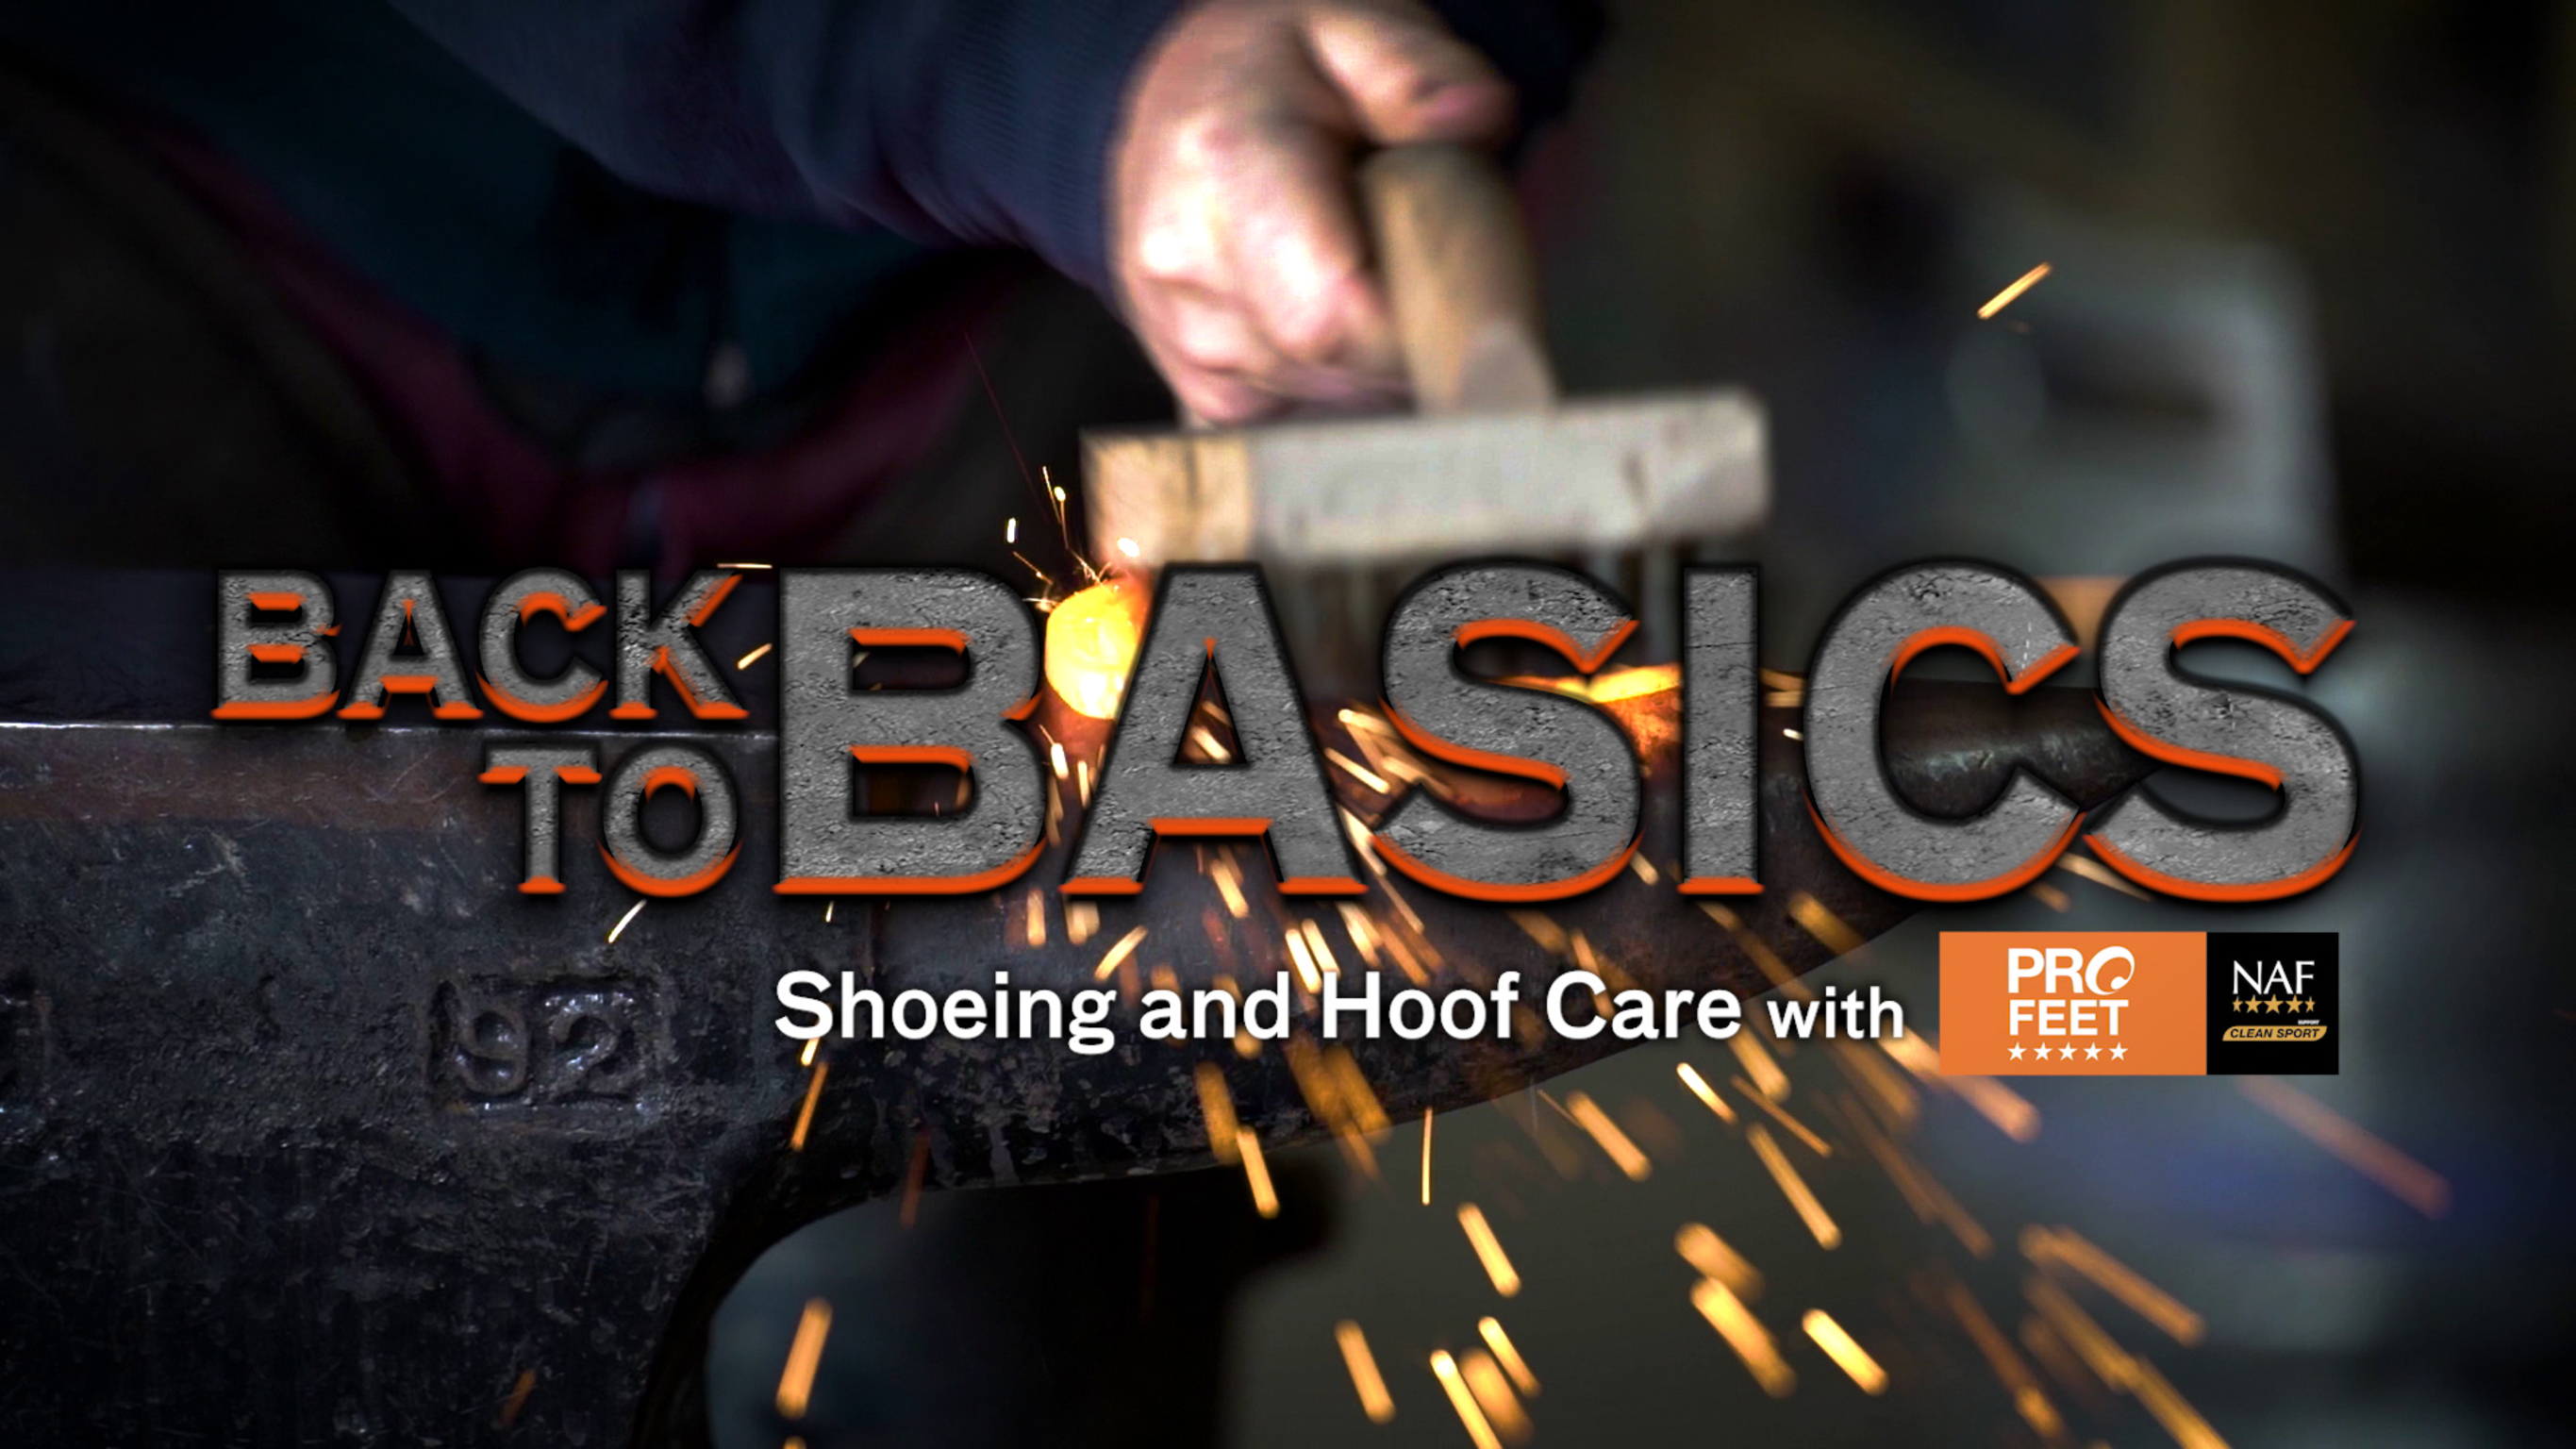 Back to Basics: Shoeing & Hoof Care with NAF.